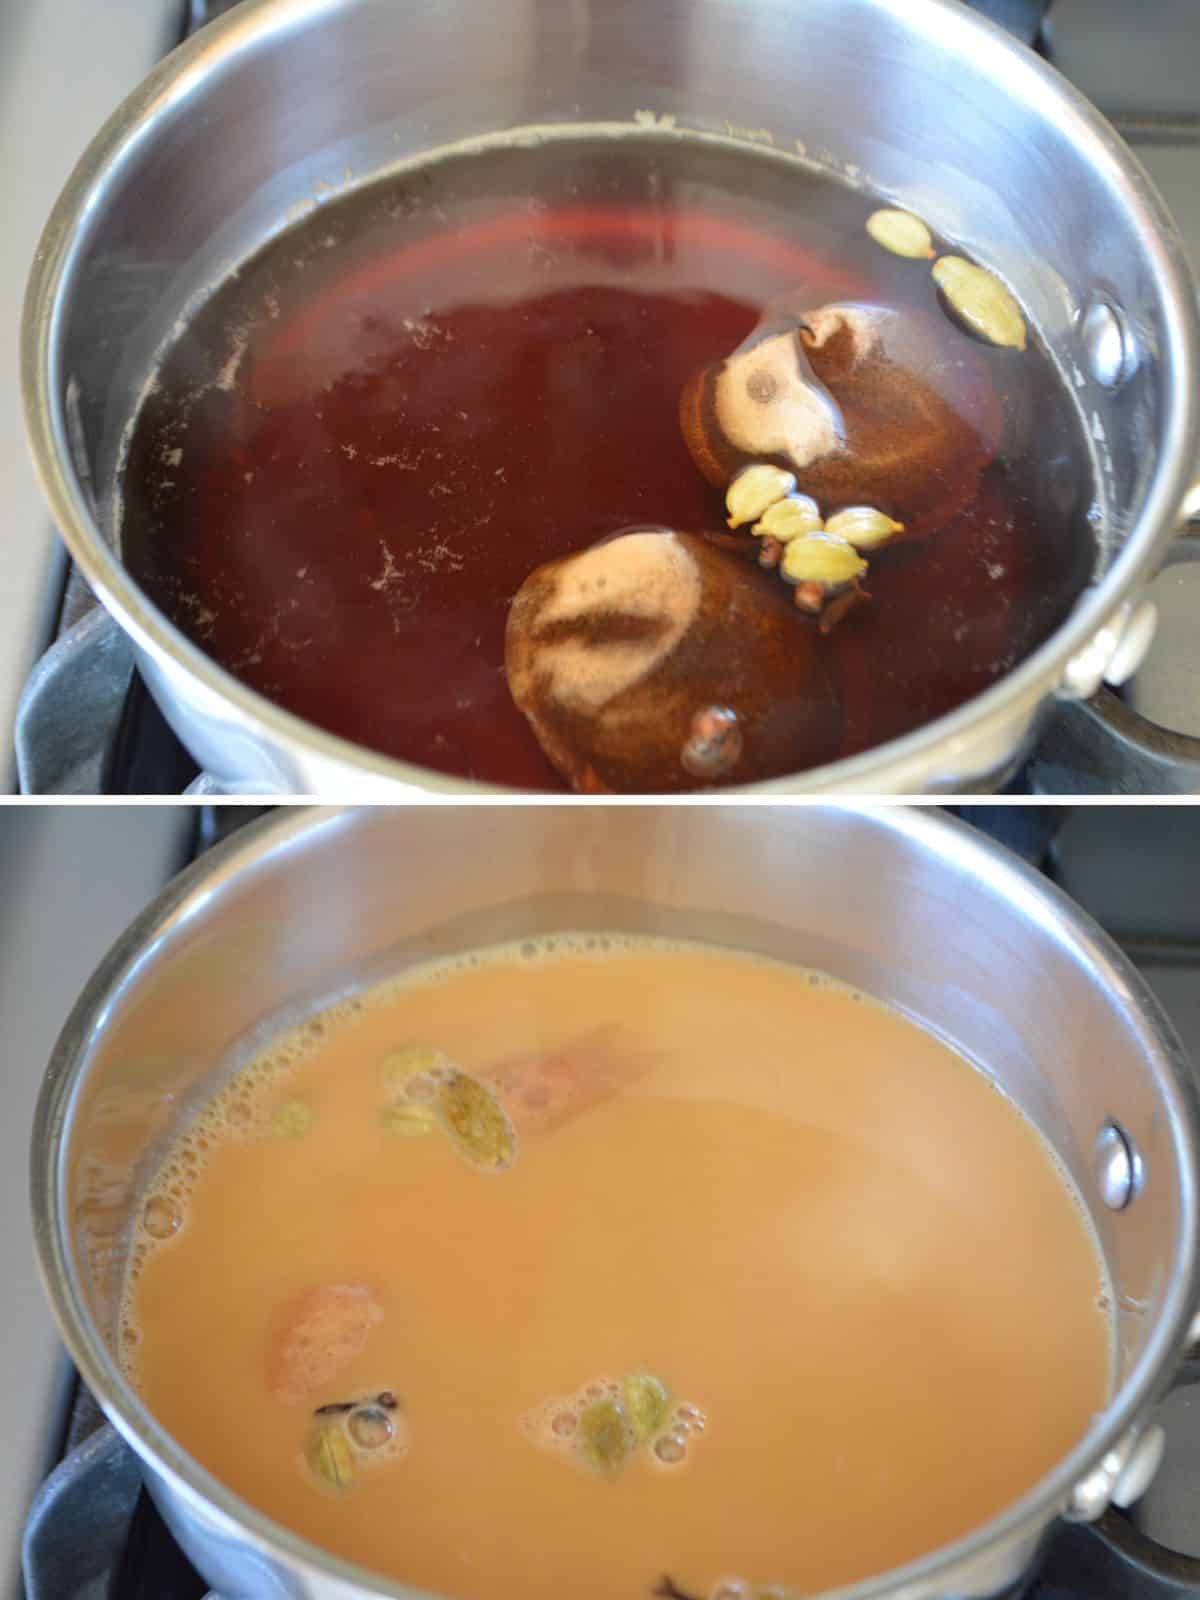 A collage of two images showing how to make Karak tea.